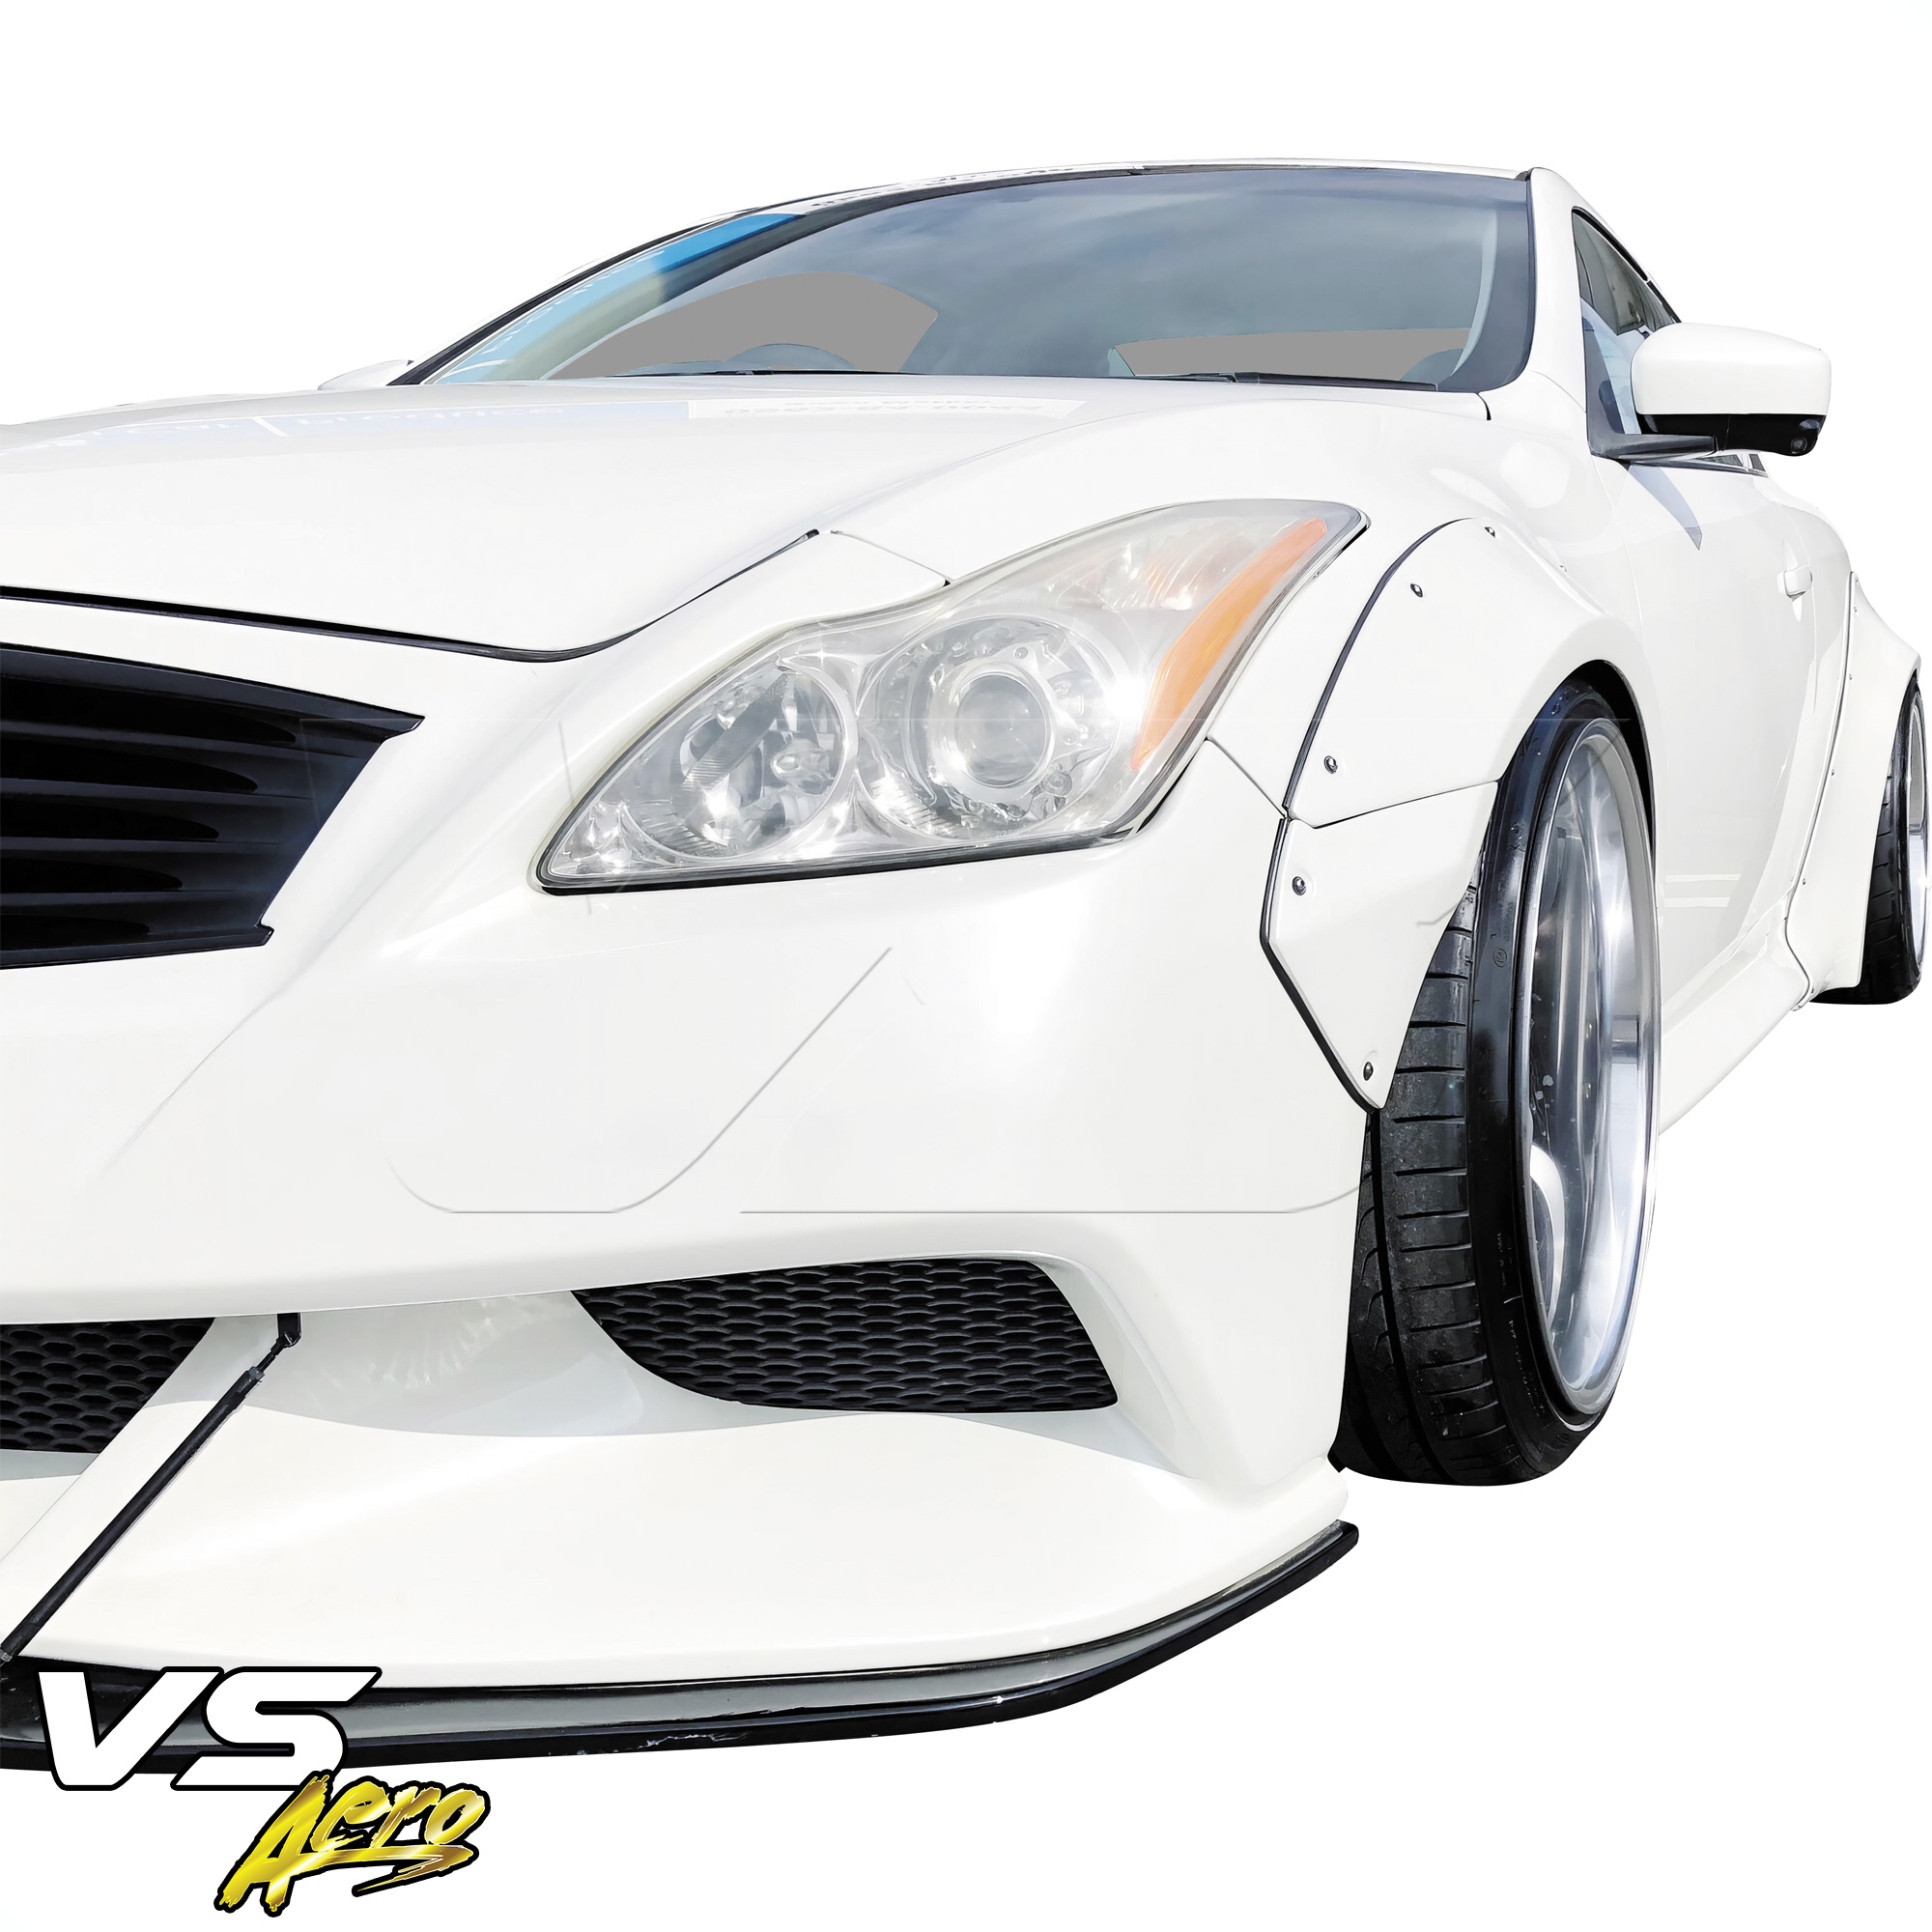 VSaero FRP LBPE Wide Body Fender Flares (front) 4pc > Infiniti G37 Coupe 2008-2015 > 2dr Coupe - Image 32